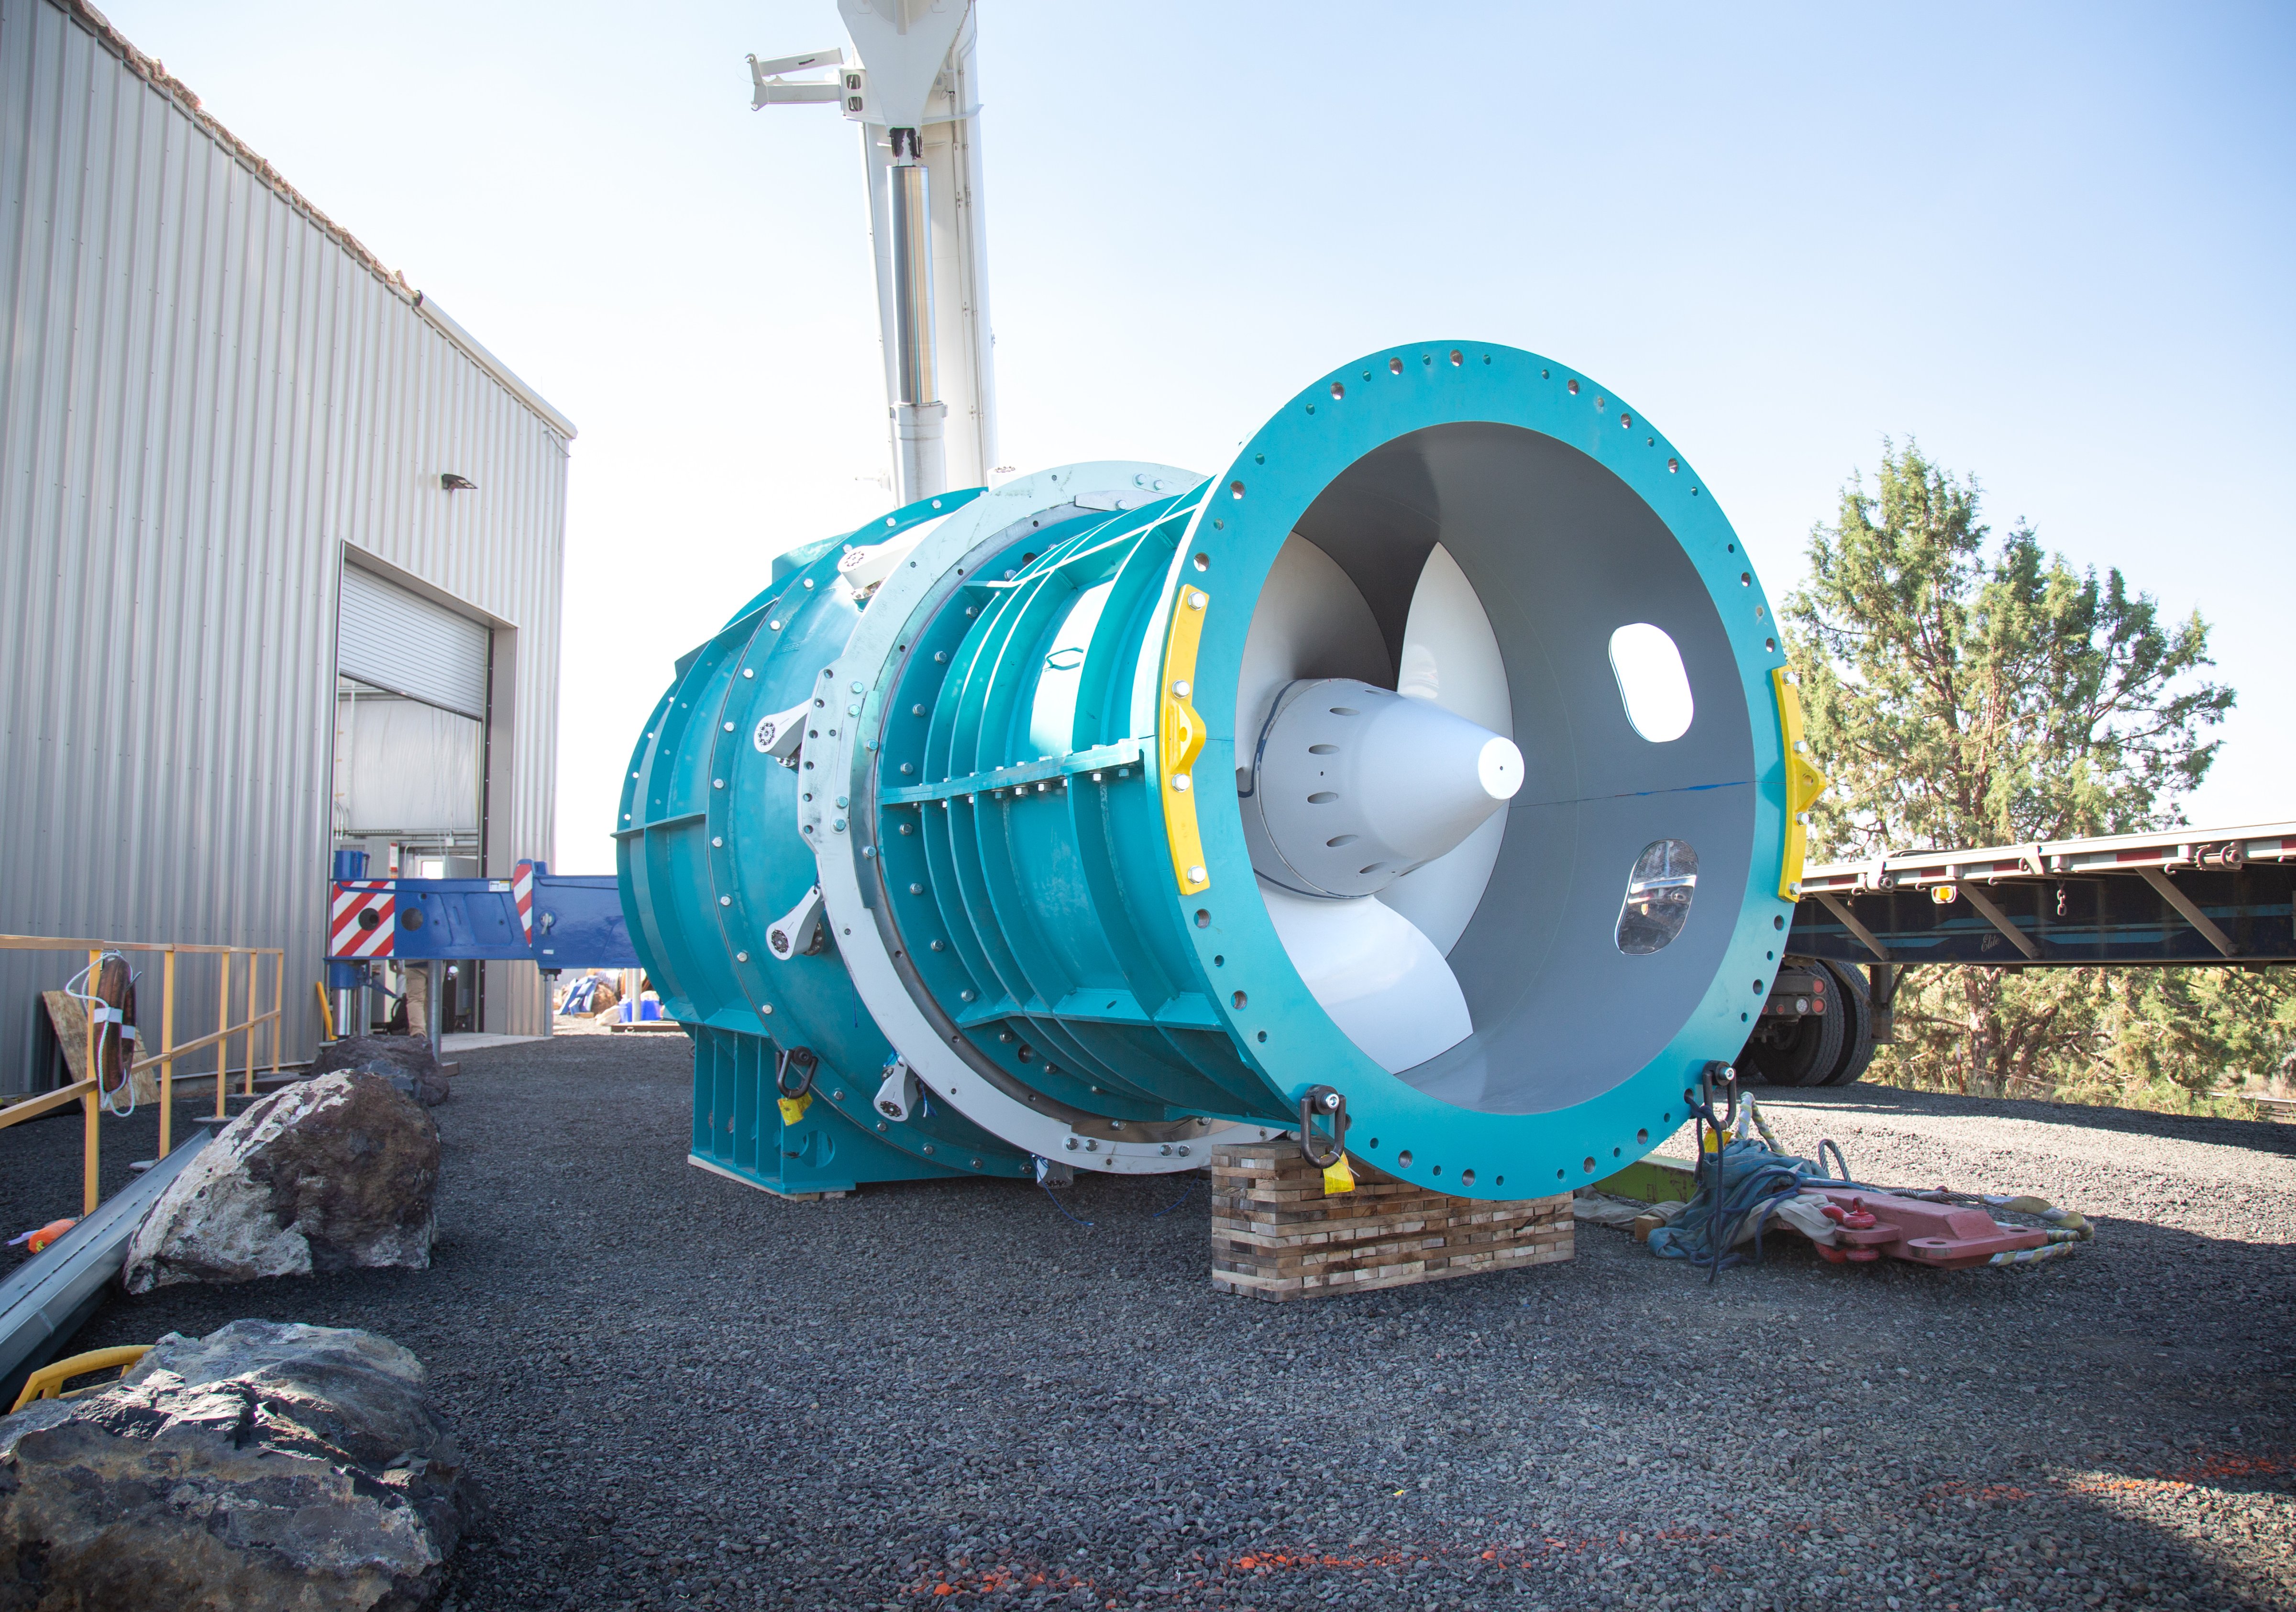 Natel's Restoration Hydro Turbine (RHT) features uniquely thick blades that allow fish to pass safely through the turbine to continue downstream migration. Monroe Hydro Plant, Madras, Oregon, in 2020. (Courtesy of Natel Energy)